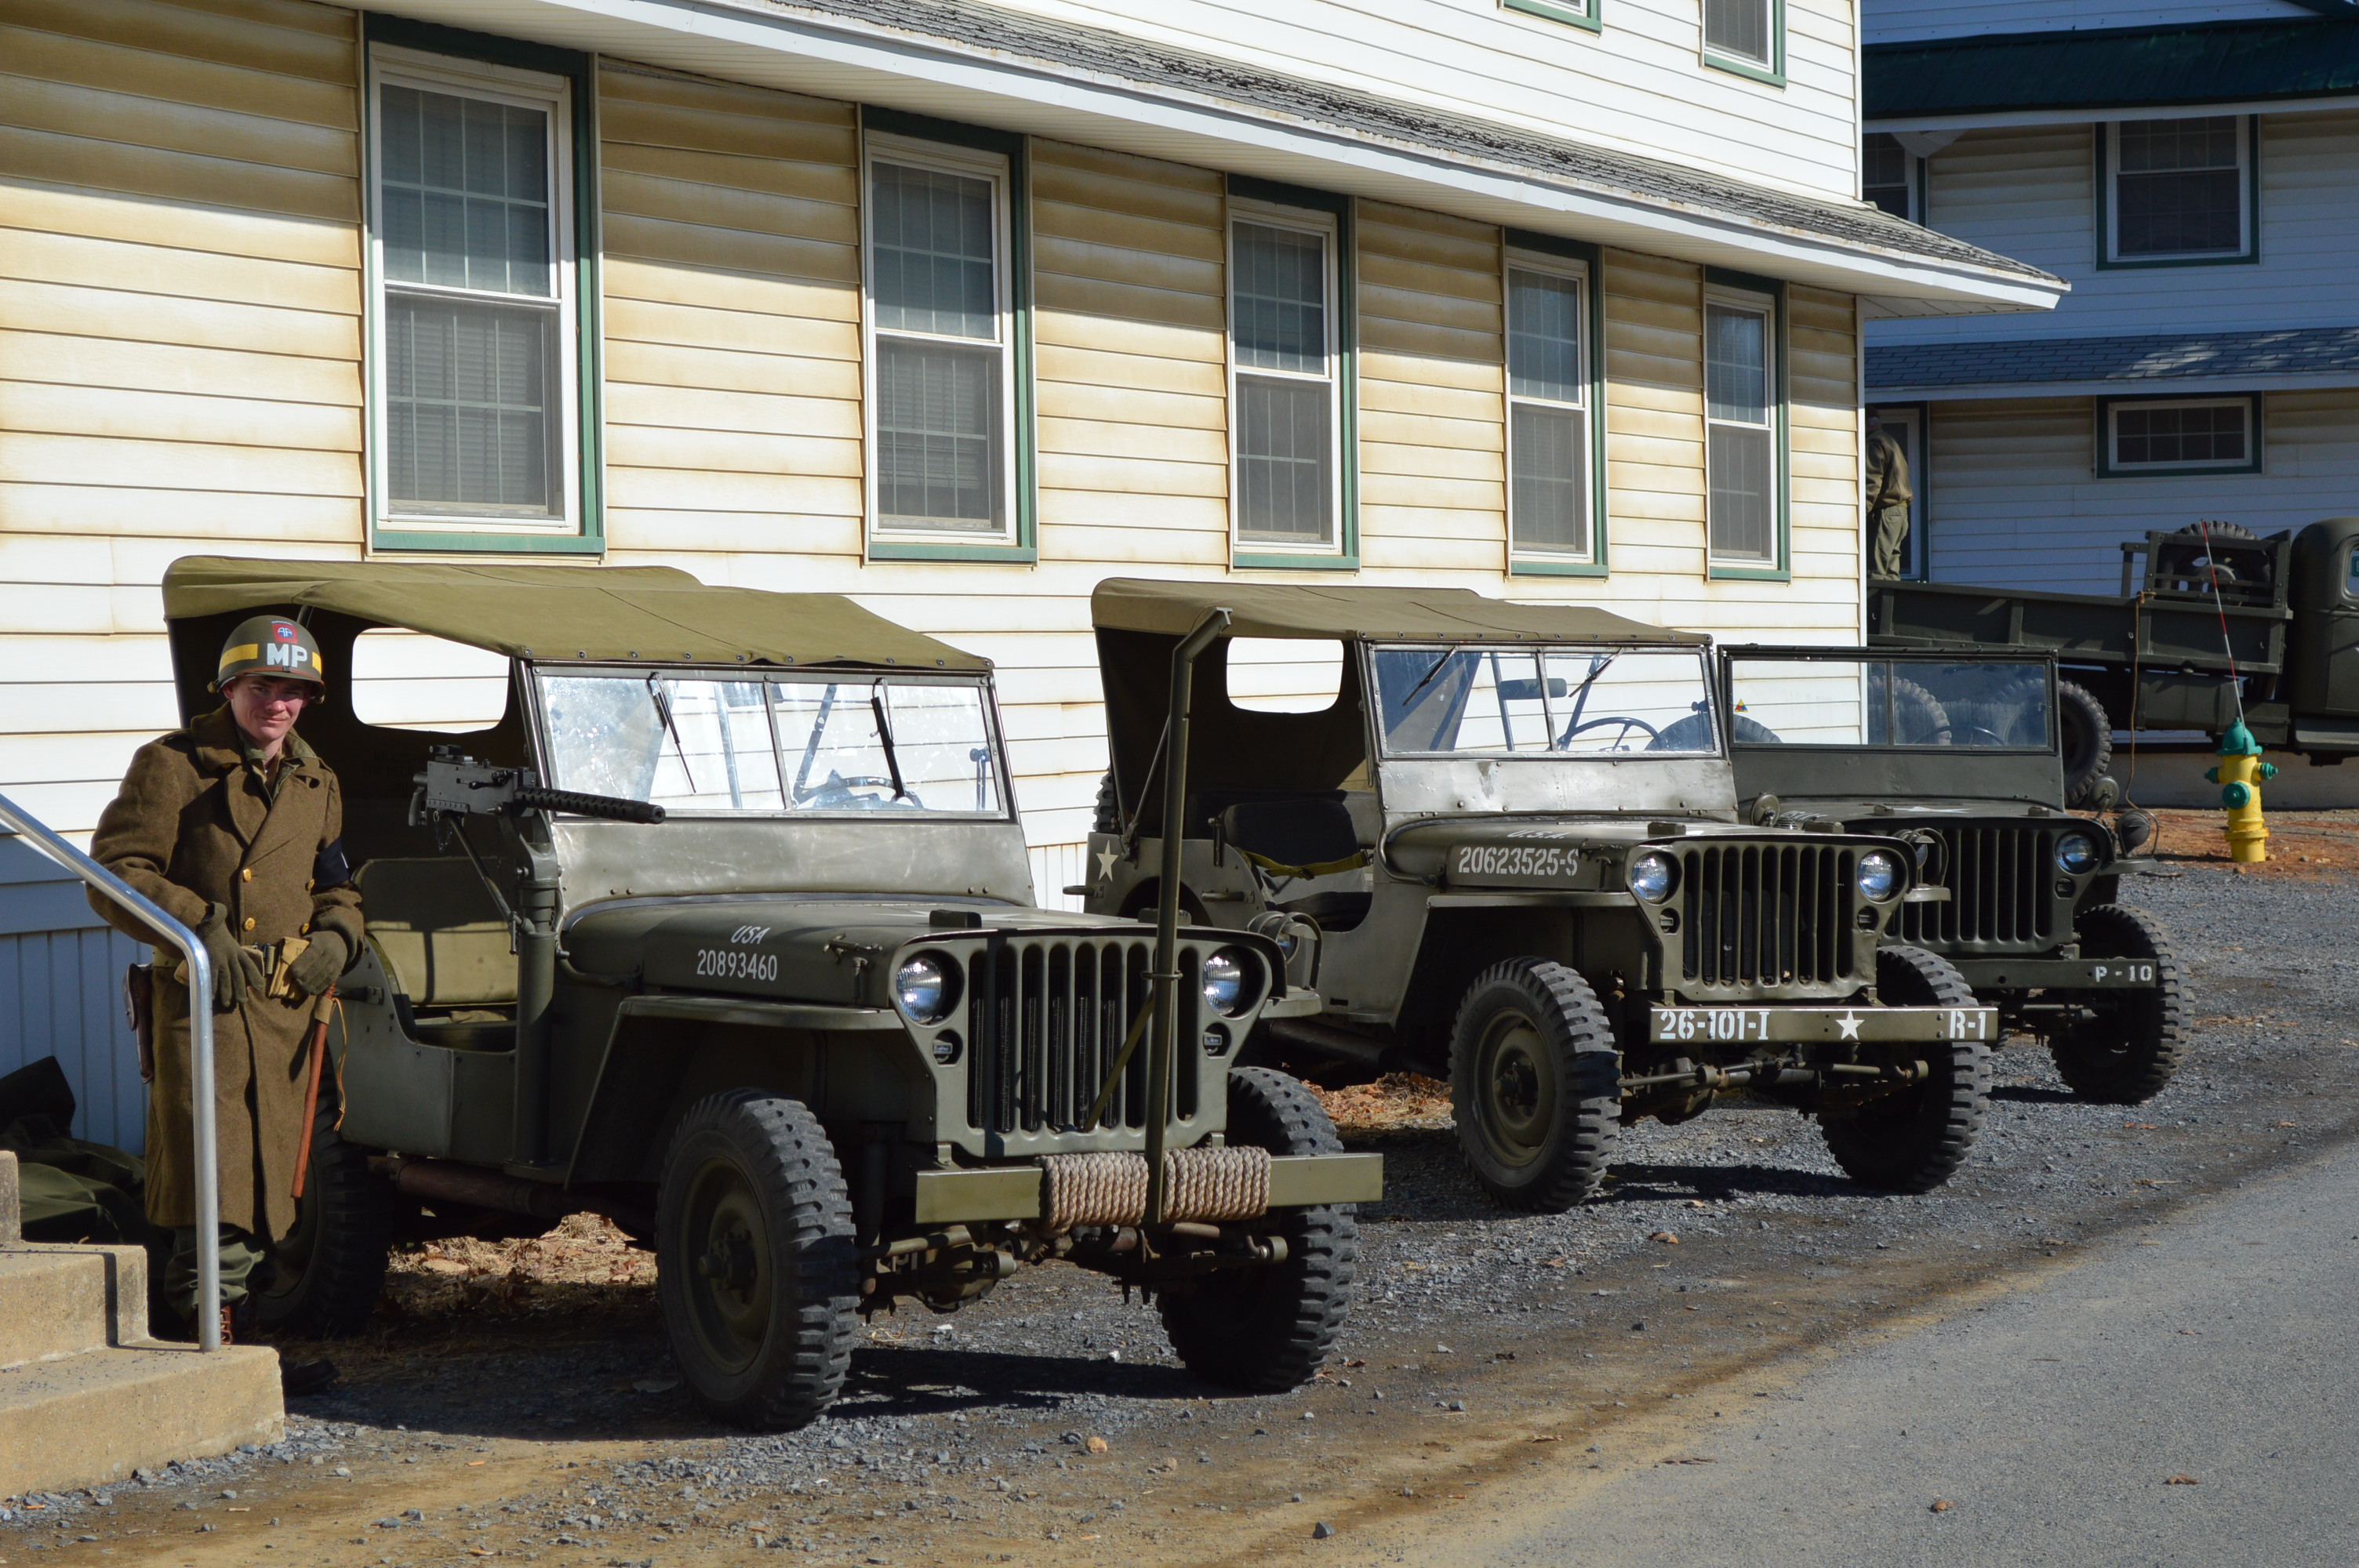 WWII-era jeeps sit idle at the 2018 WWII Historical Association's annual Battle of the Bulge Commemoration at Fort Indiantown Gap, PA. credit Anthony C. Hayes